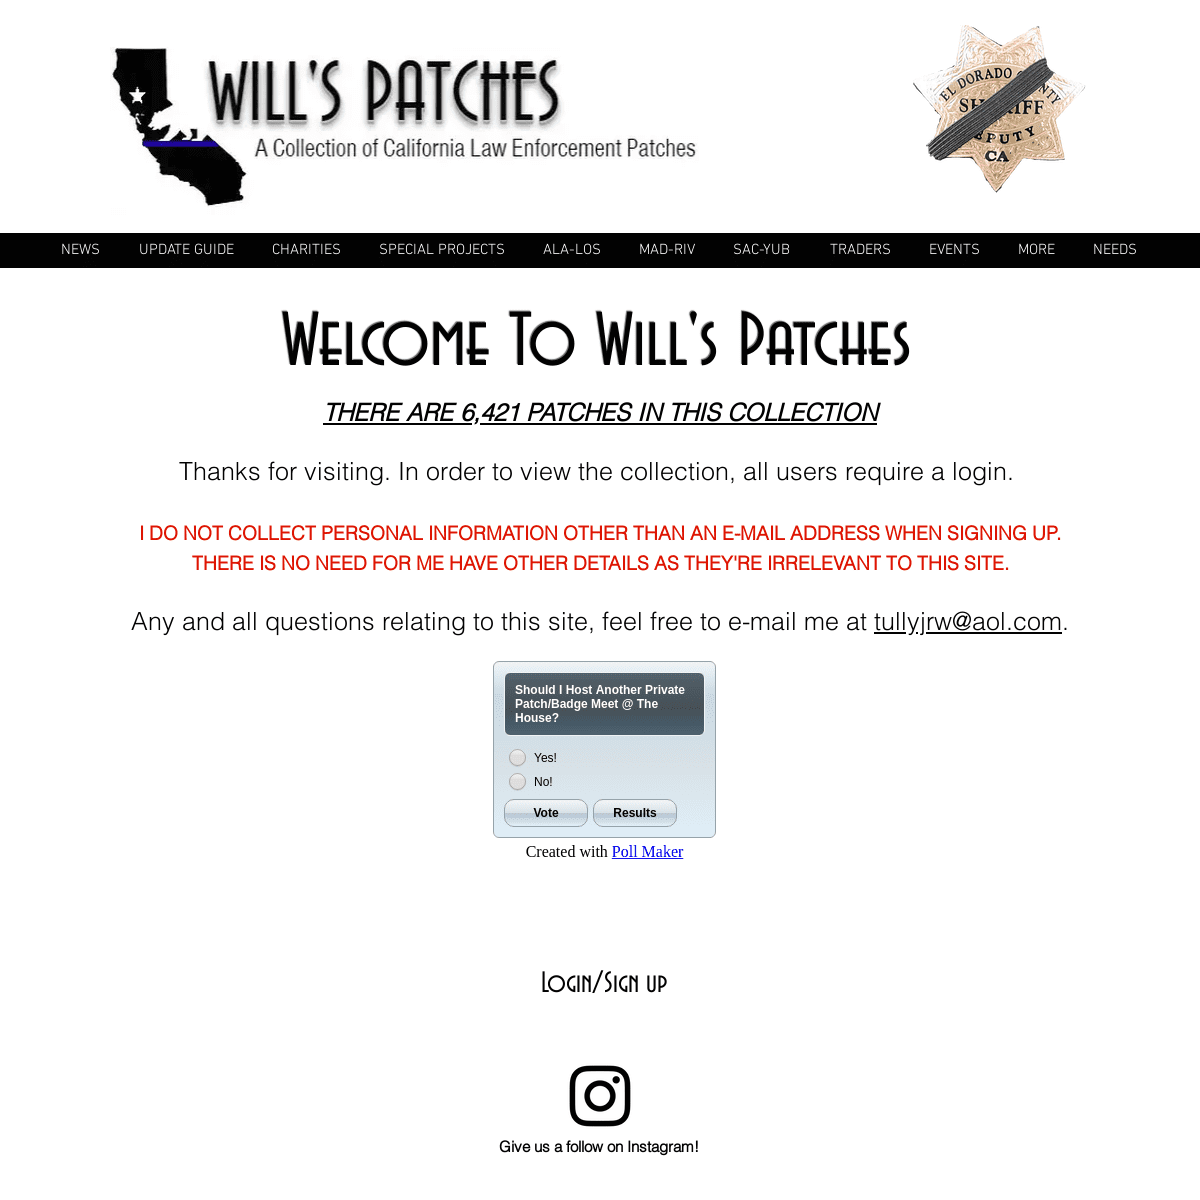 A complete backup of willspatches.net